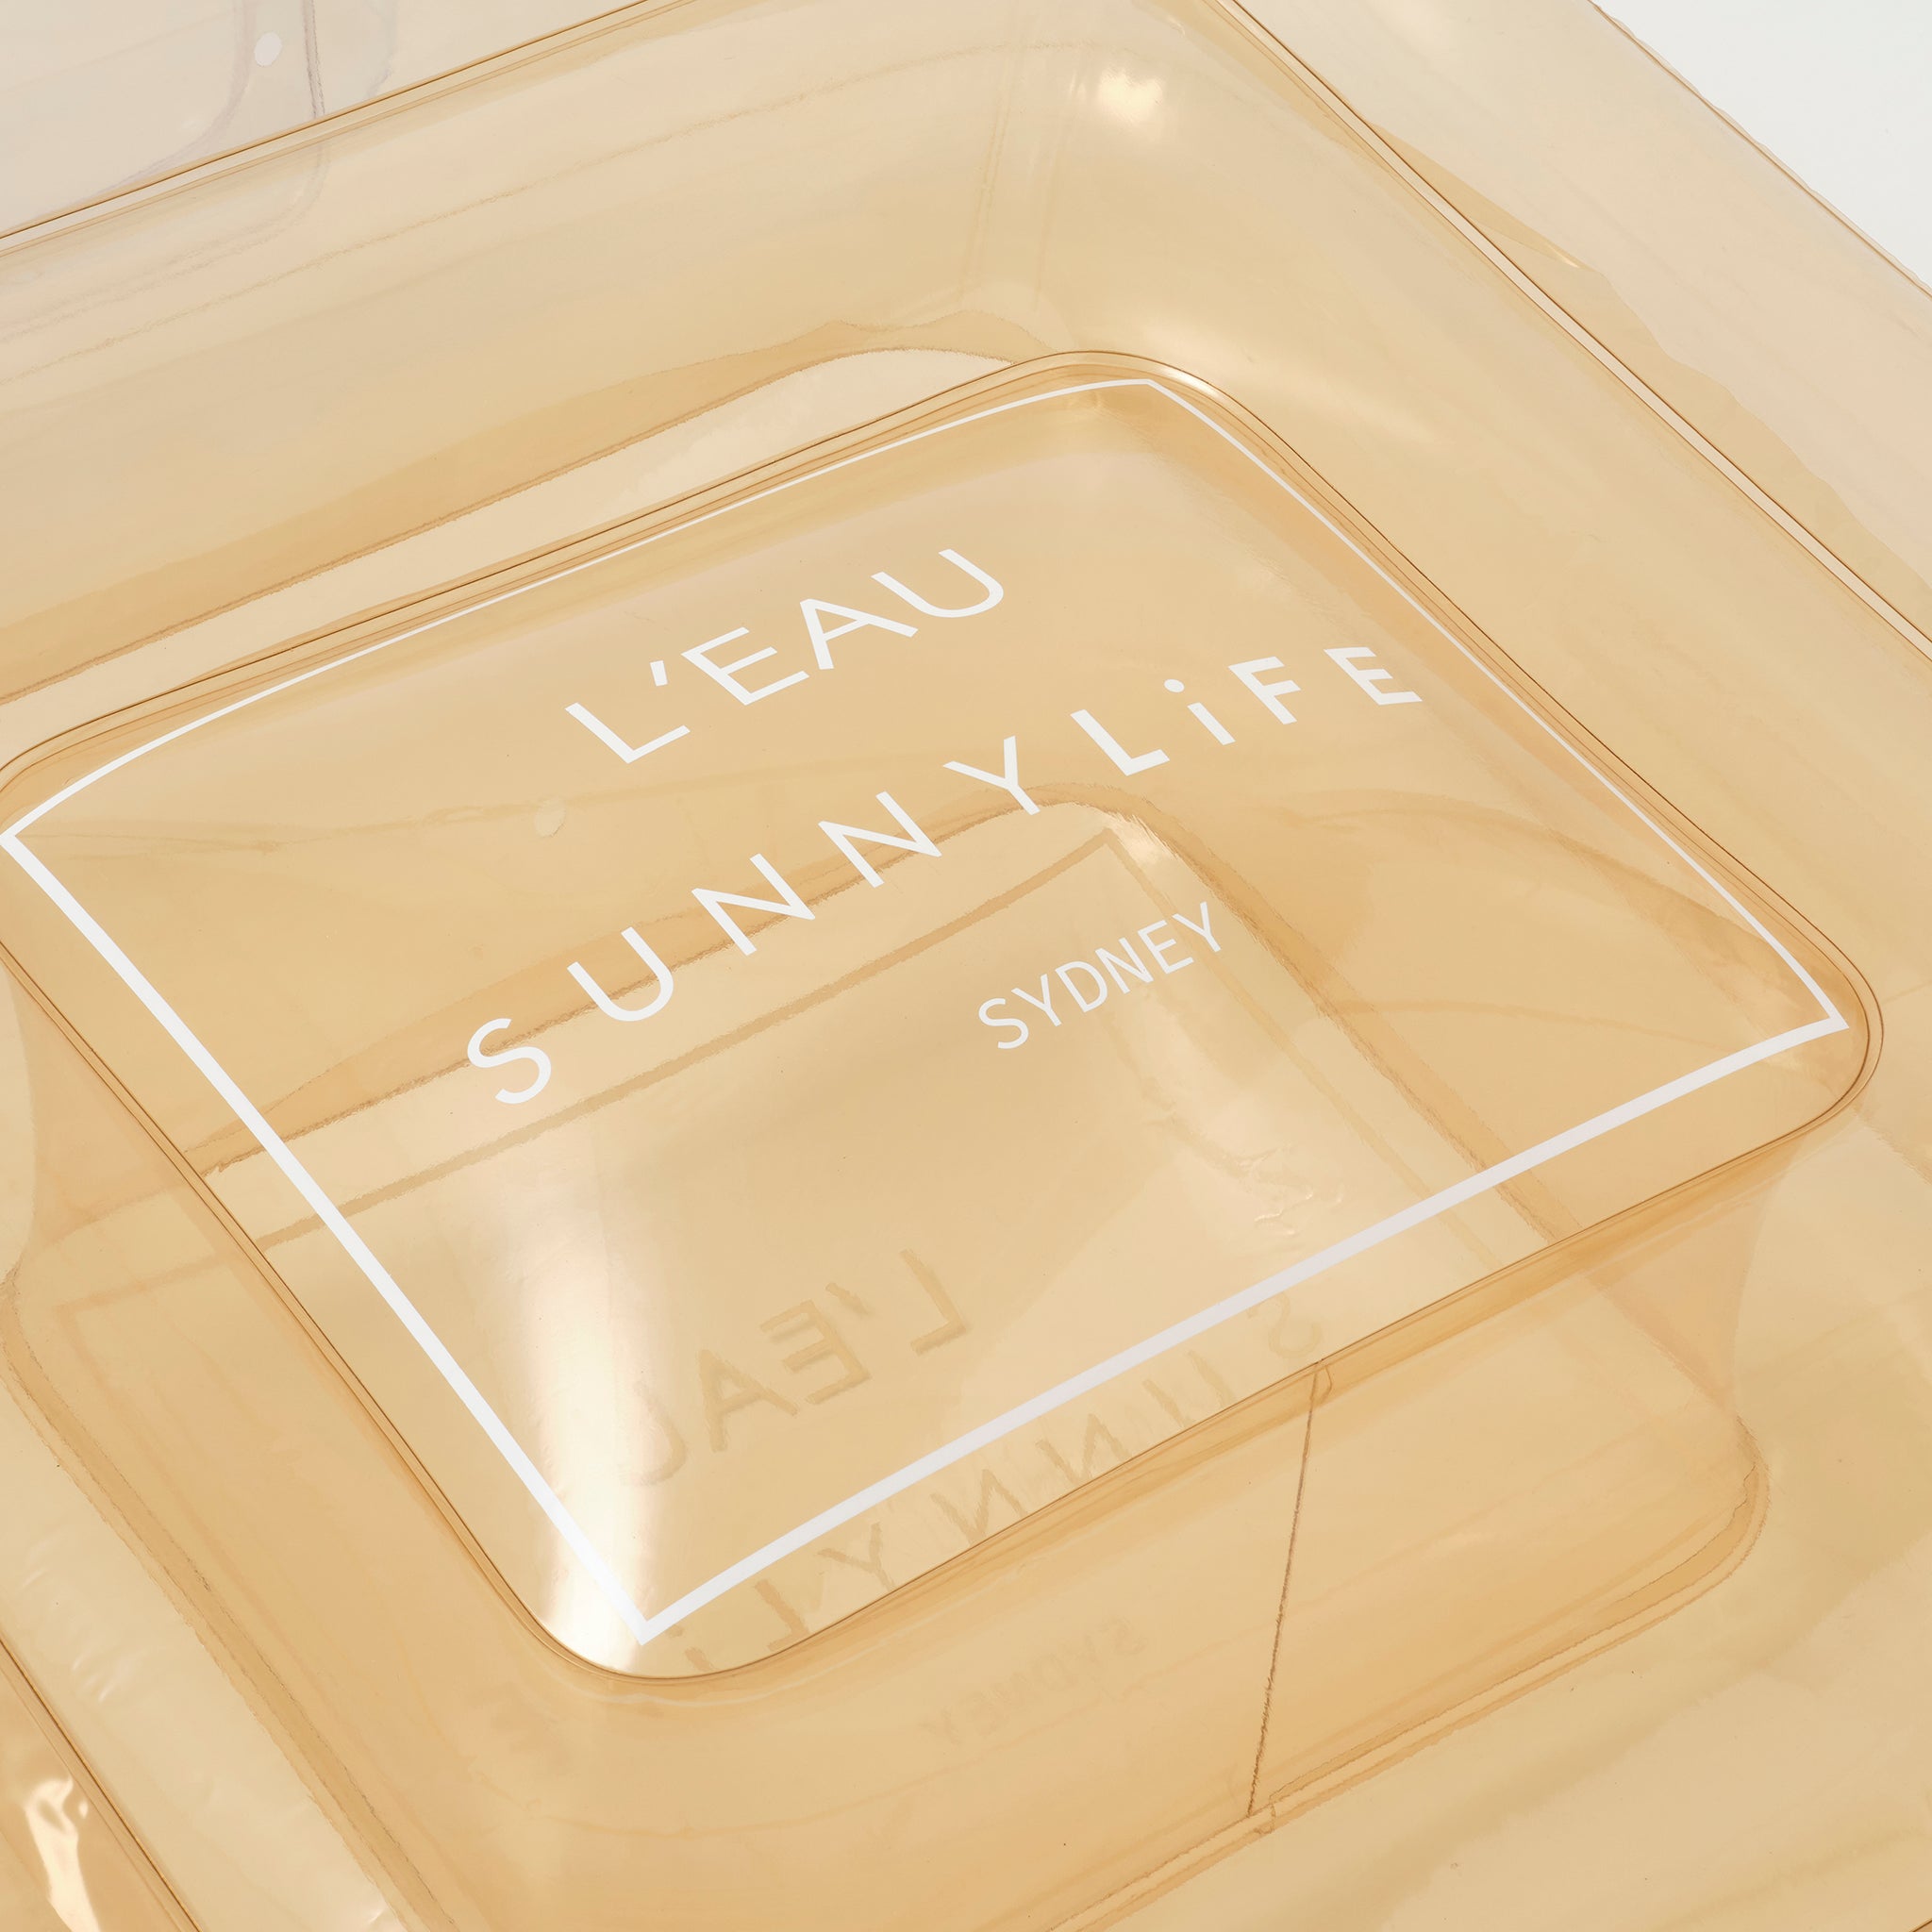 SUNNYLiFE | Luxe Lie On Float | Parfum Champagne